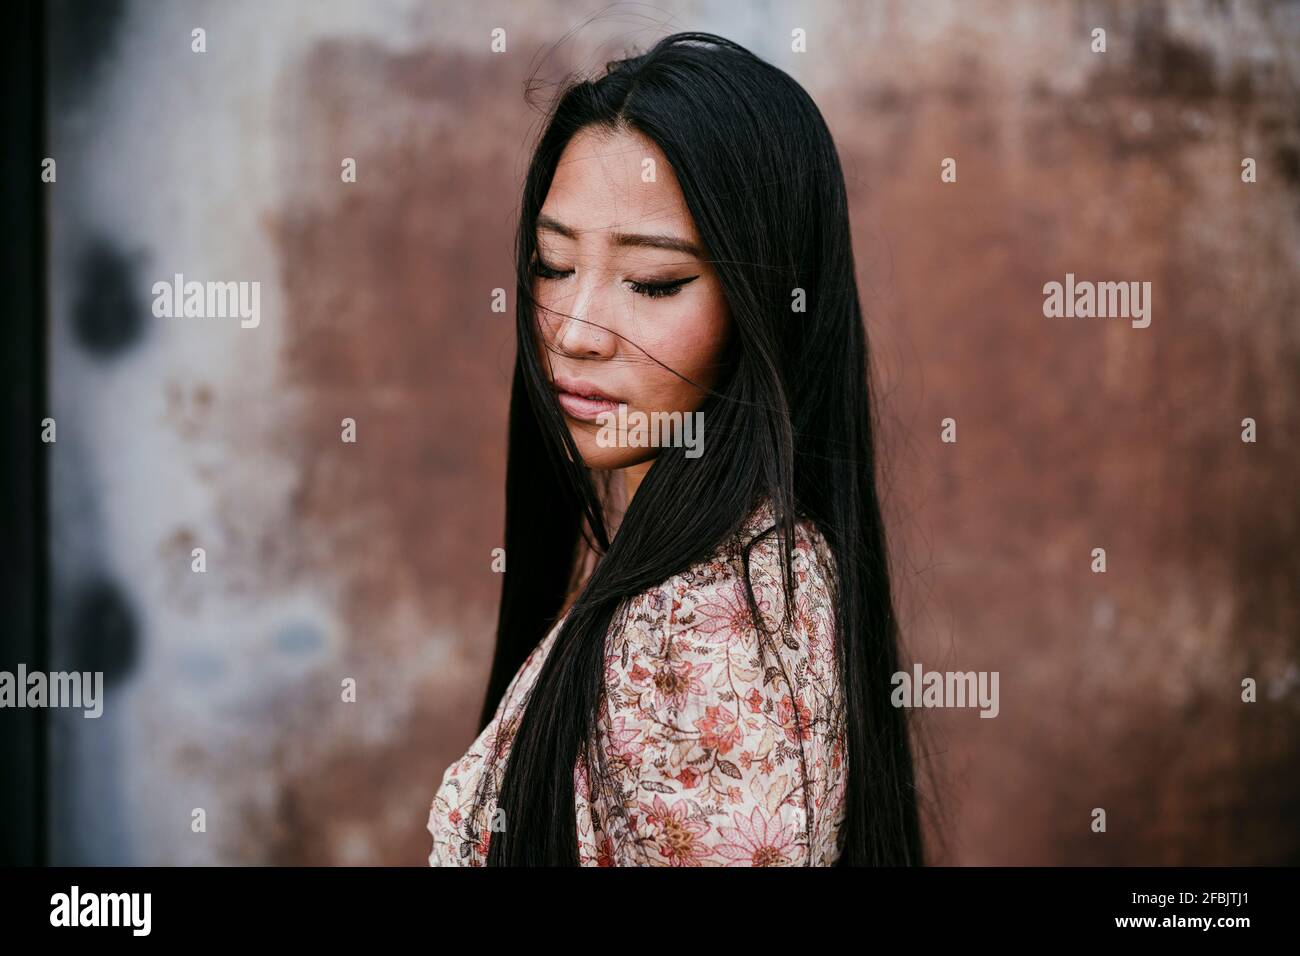 Beautiful woman with eyes closed by rusty iron door Stock Photo